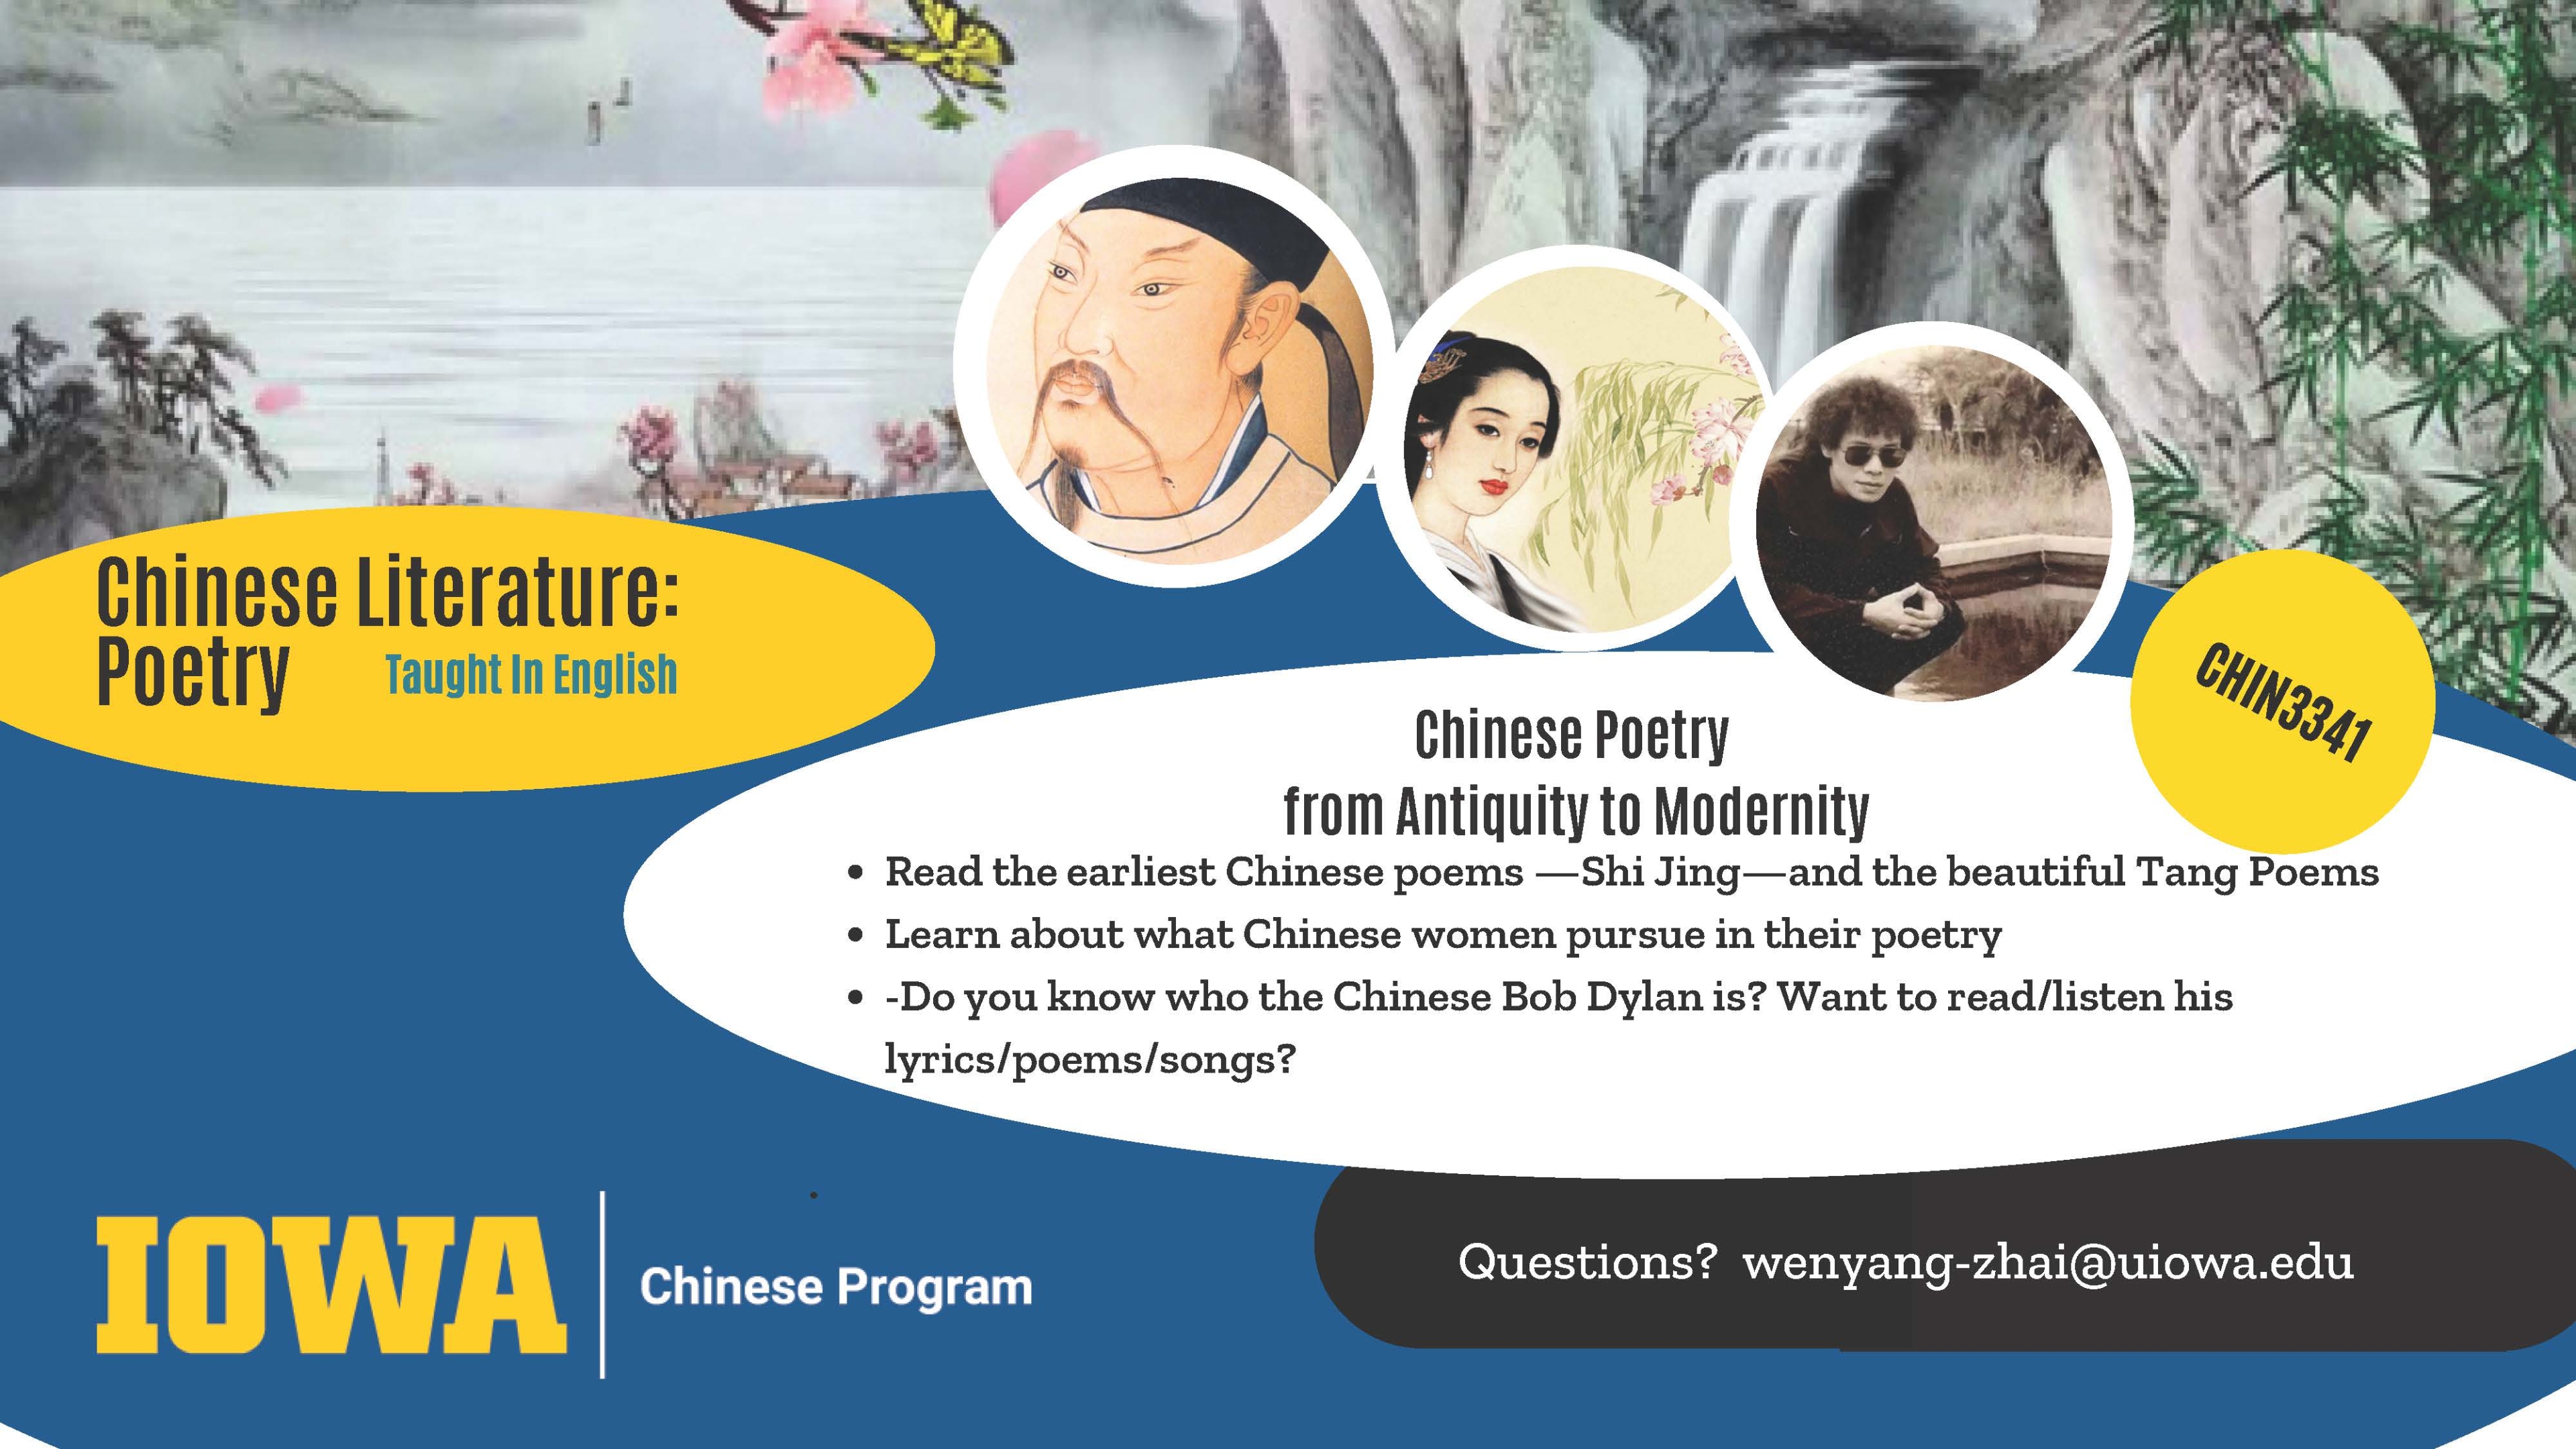 Chinese Literature: Poetry. Taught in English. Chinese poetry from antiquity to modernity. Read the earliest Chinese poems, Shi Jing, and the beautiful Tang poems. Learn about what Chinese women pursue in their poetry. Do you know who the Chinese Bob Dylan is? Want to read/listen to his lyrics, poems, and songs? Questions? Email wenyang-zhai@uiowa.edu